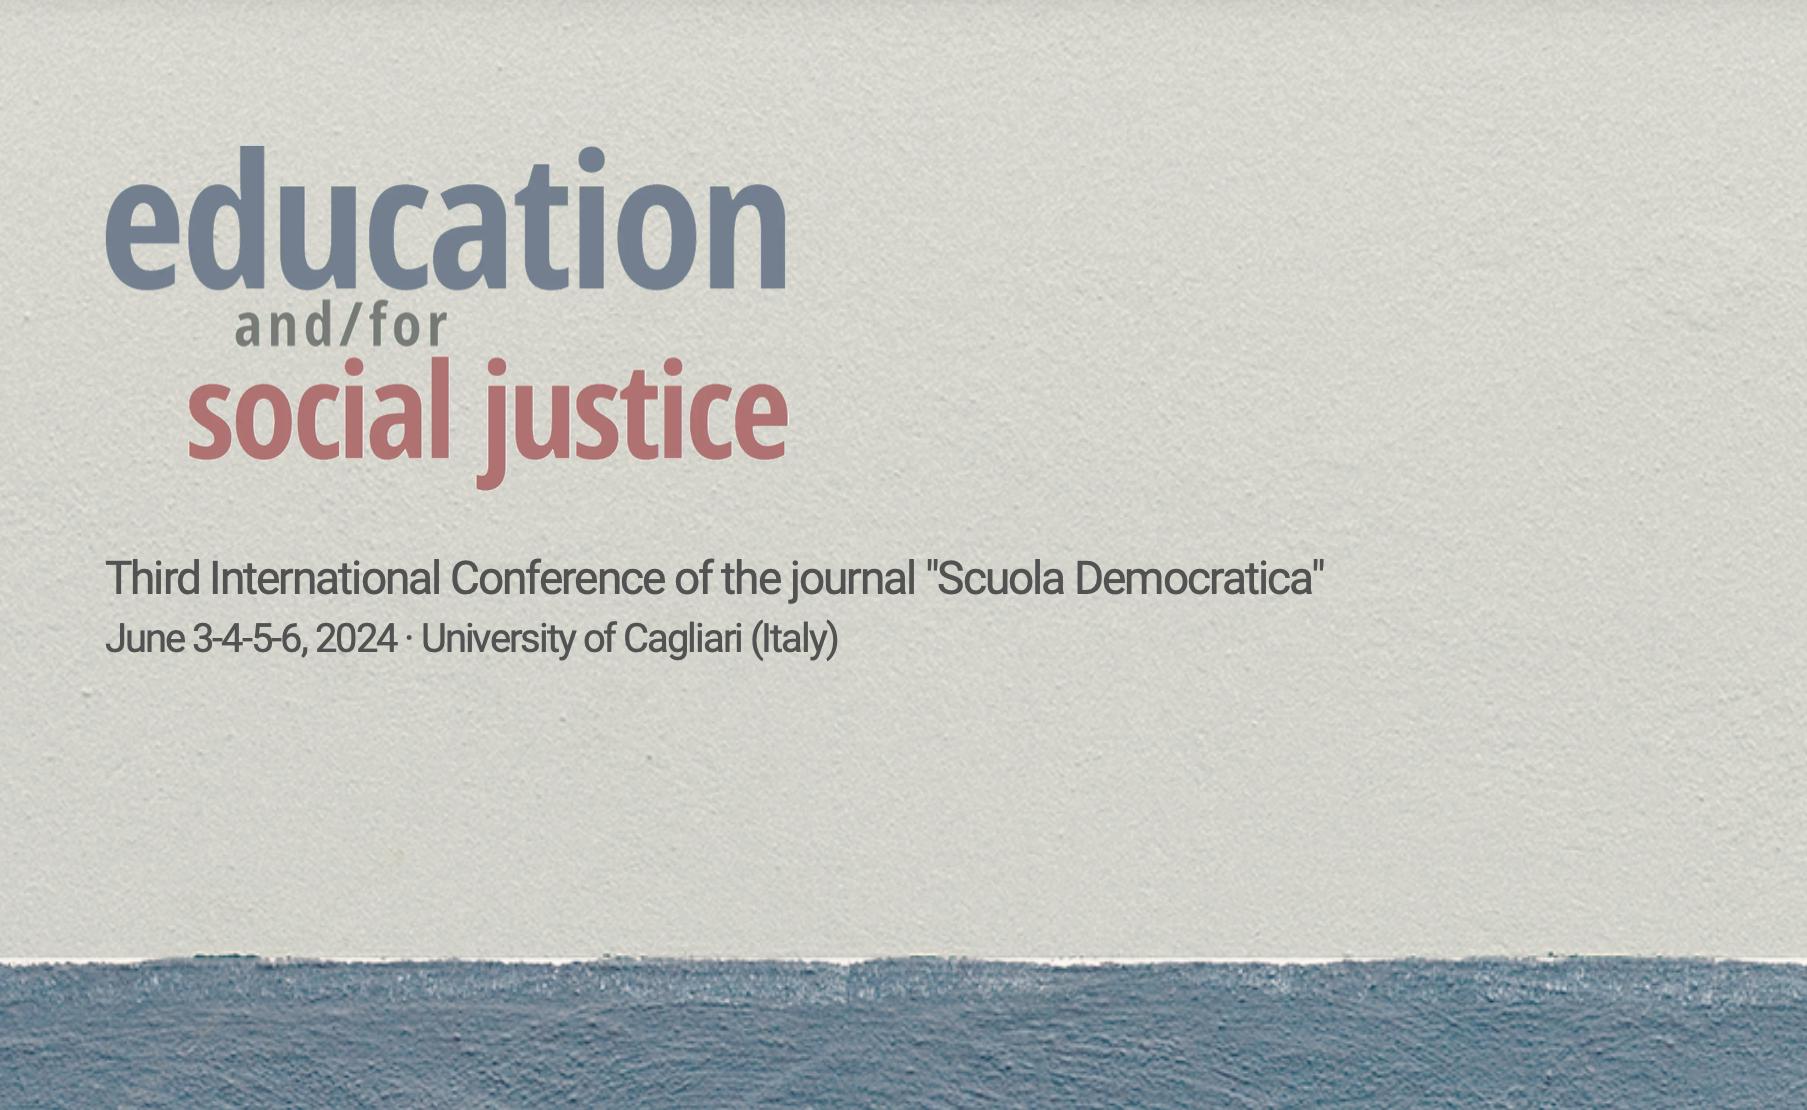 Third International Conference of the journal "Scuola Democratica"